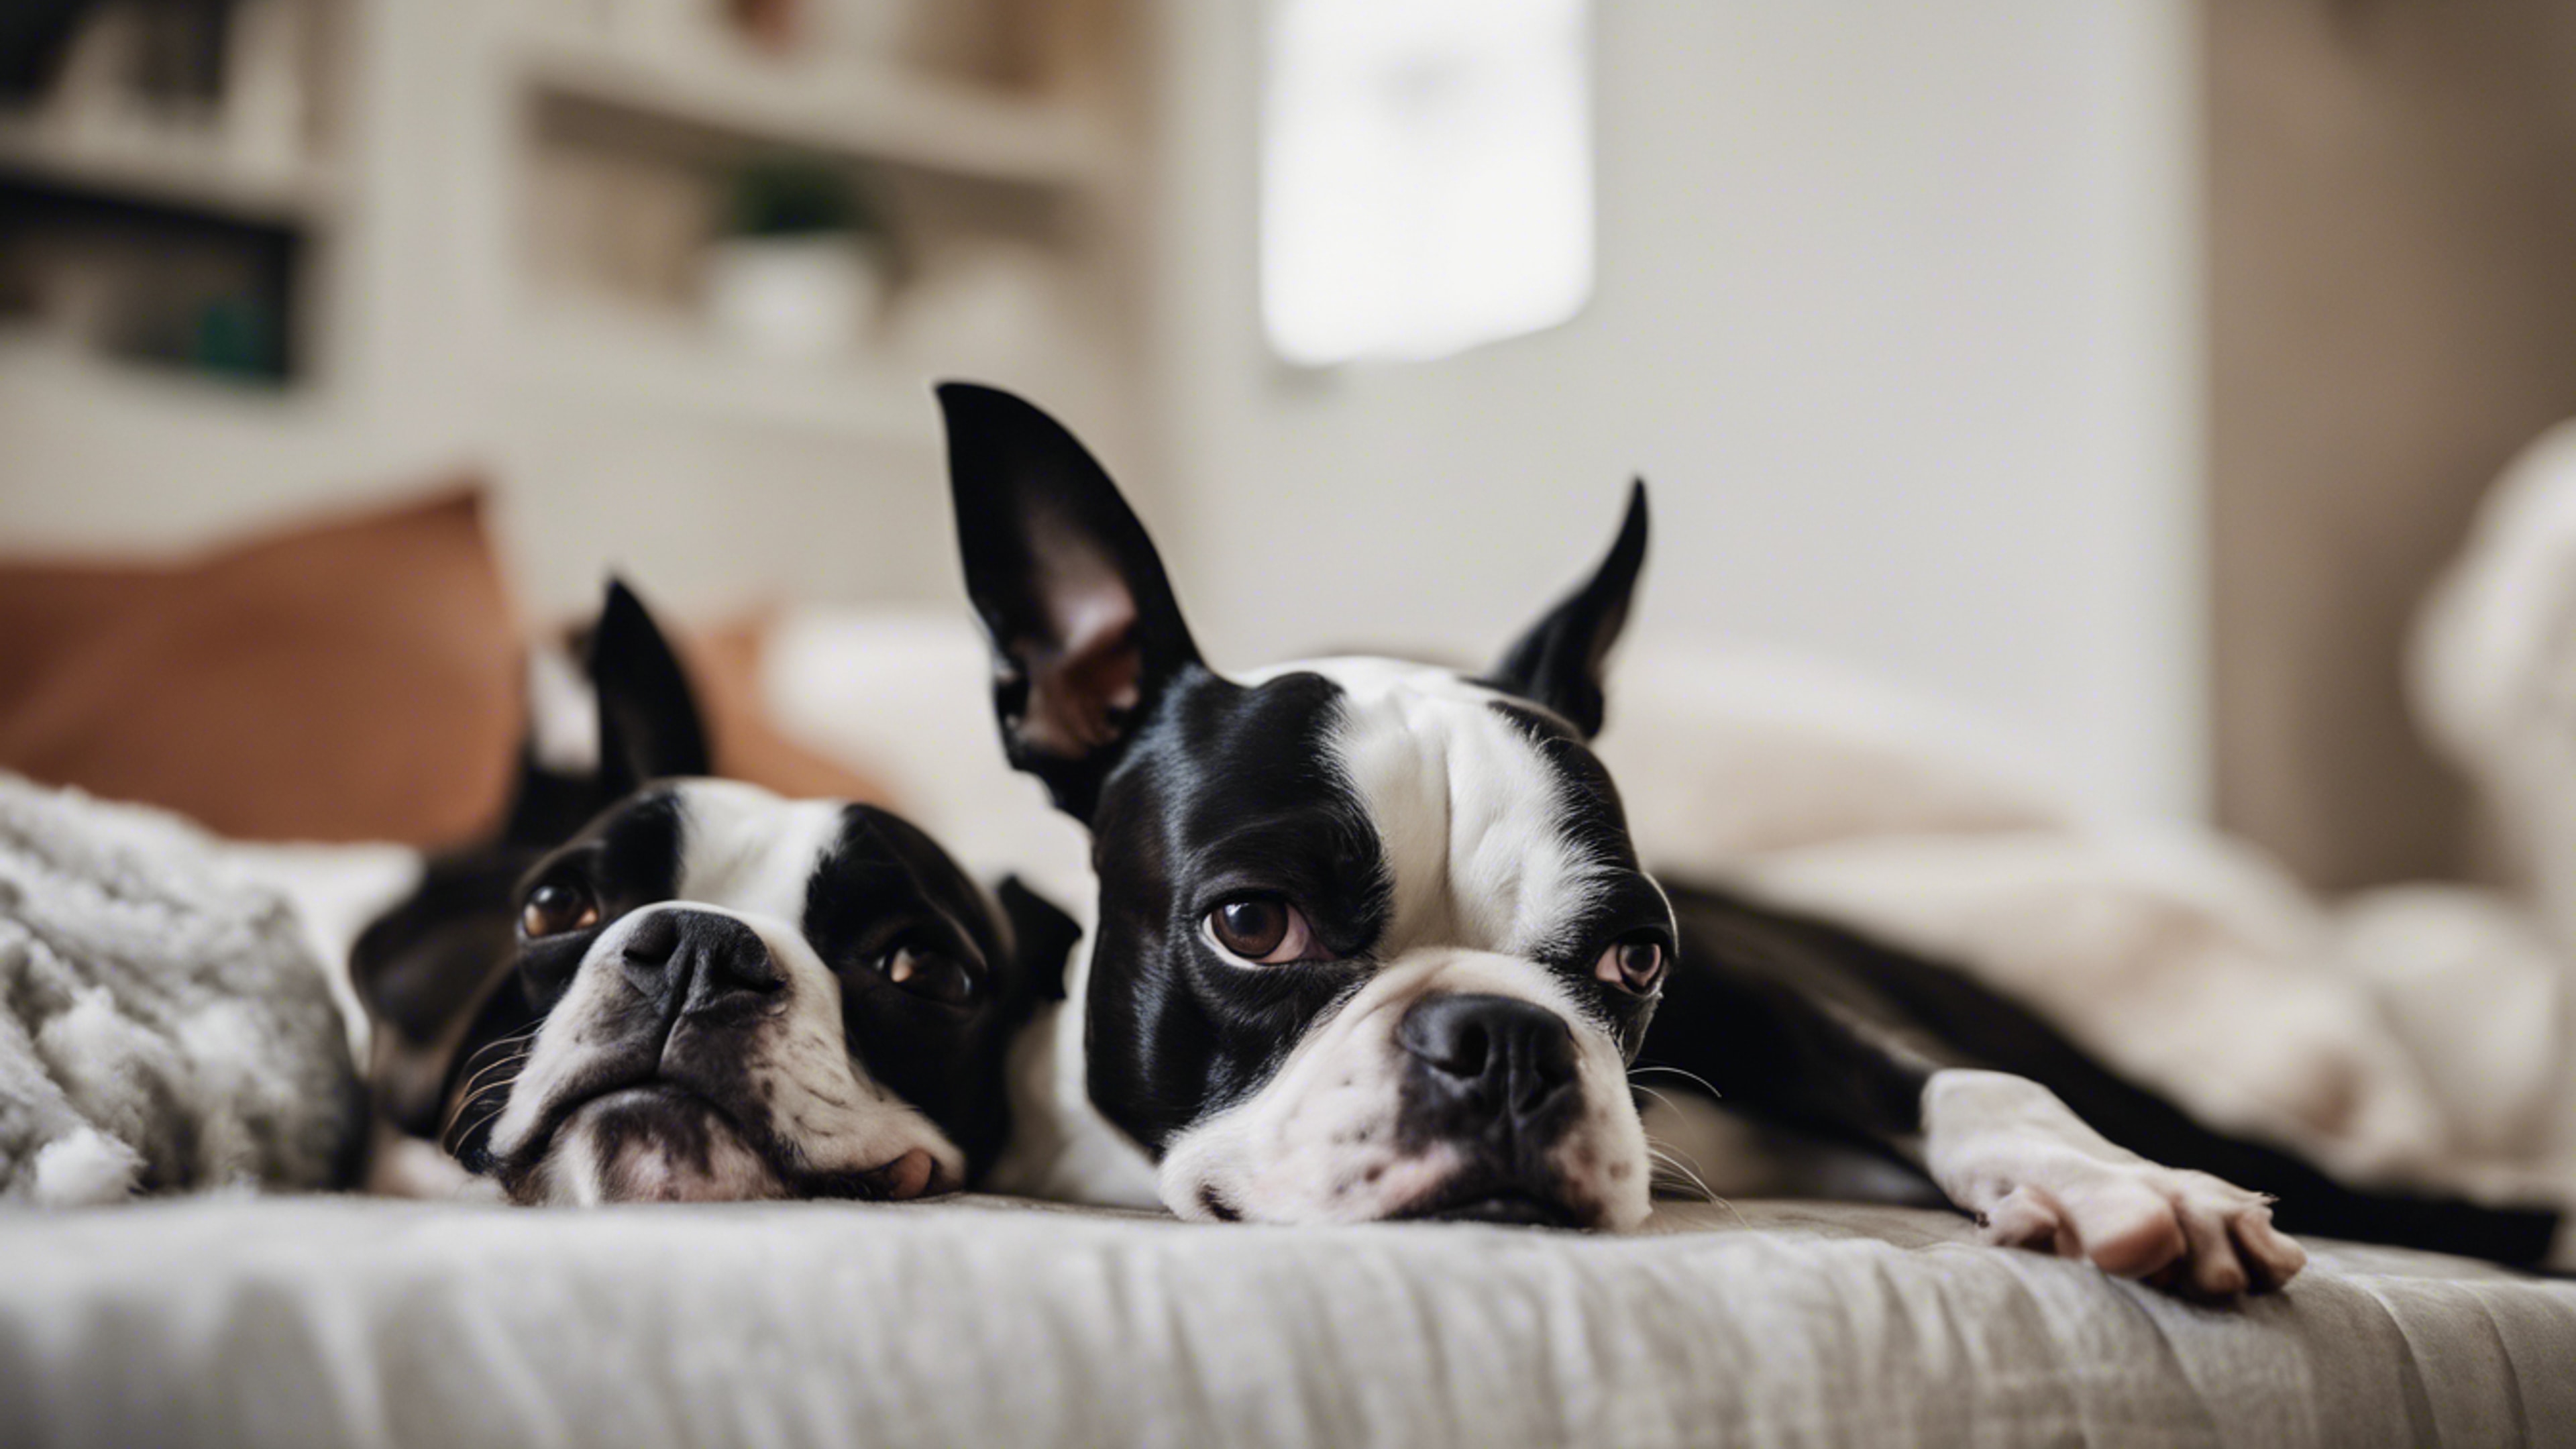 Two Boston Terriers laying comfortably on their sides, dozing away the afternoon in a suburban home. Tapéta[f1fad920e9554f308ac1]